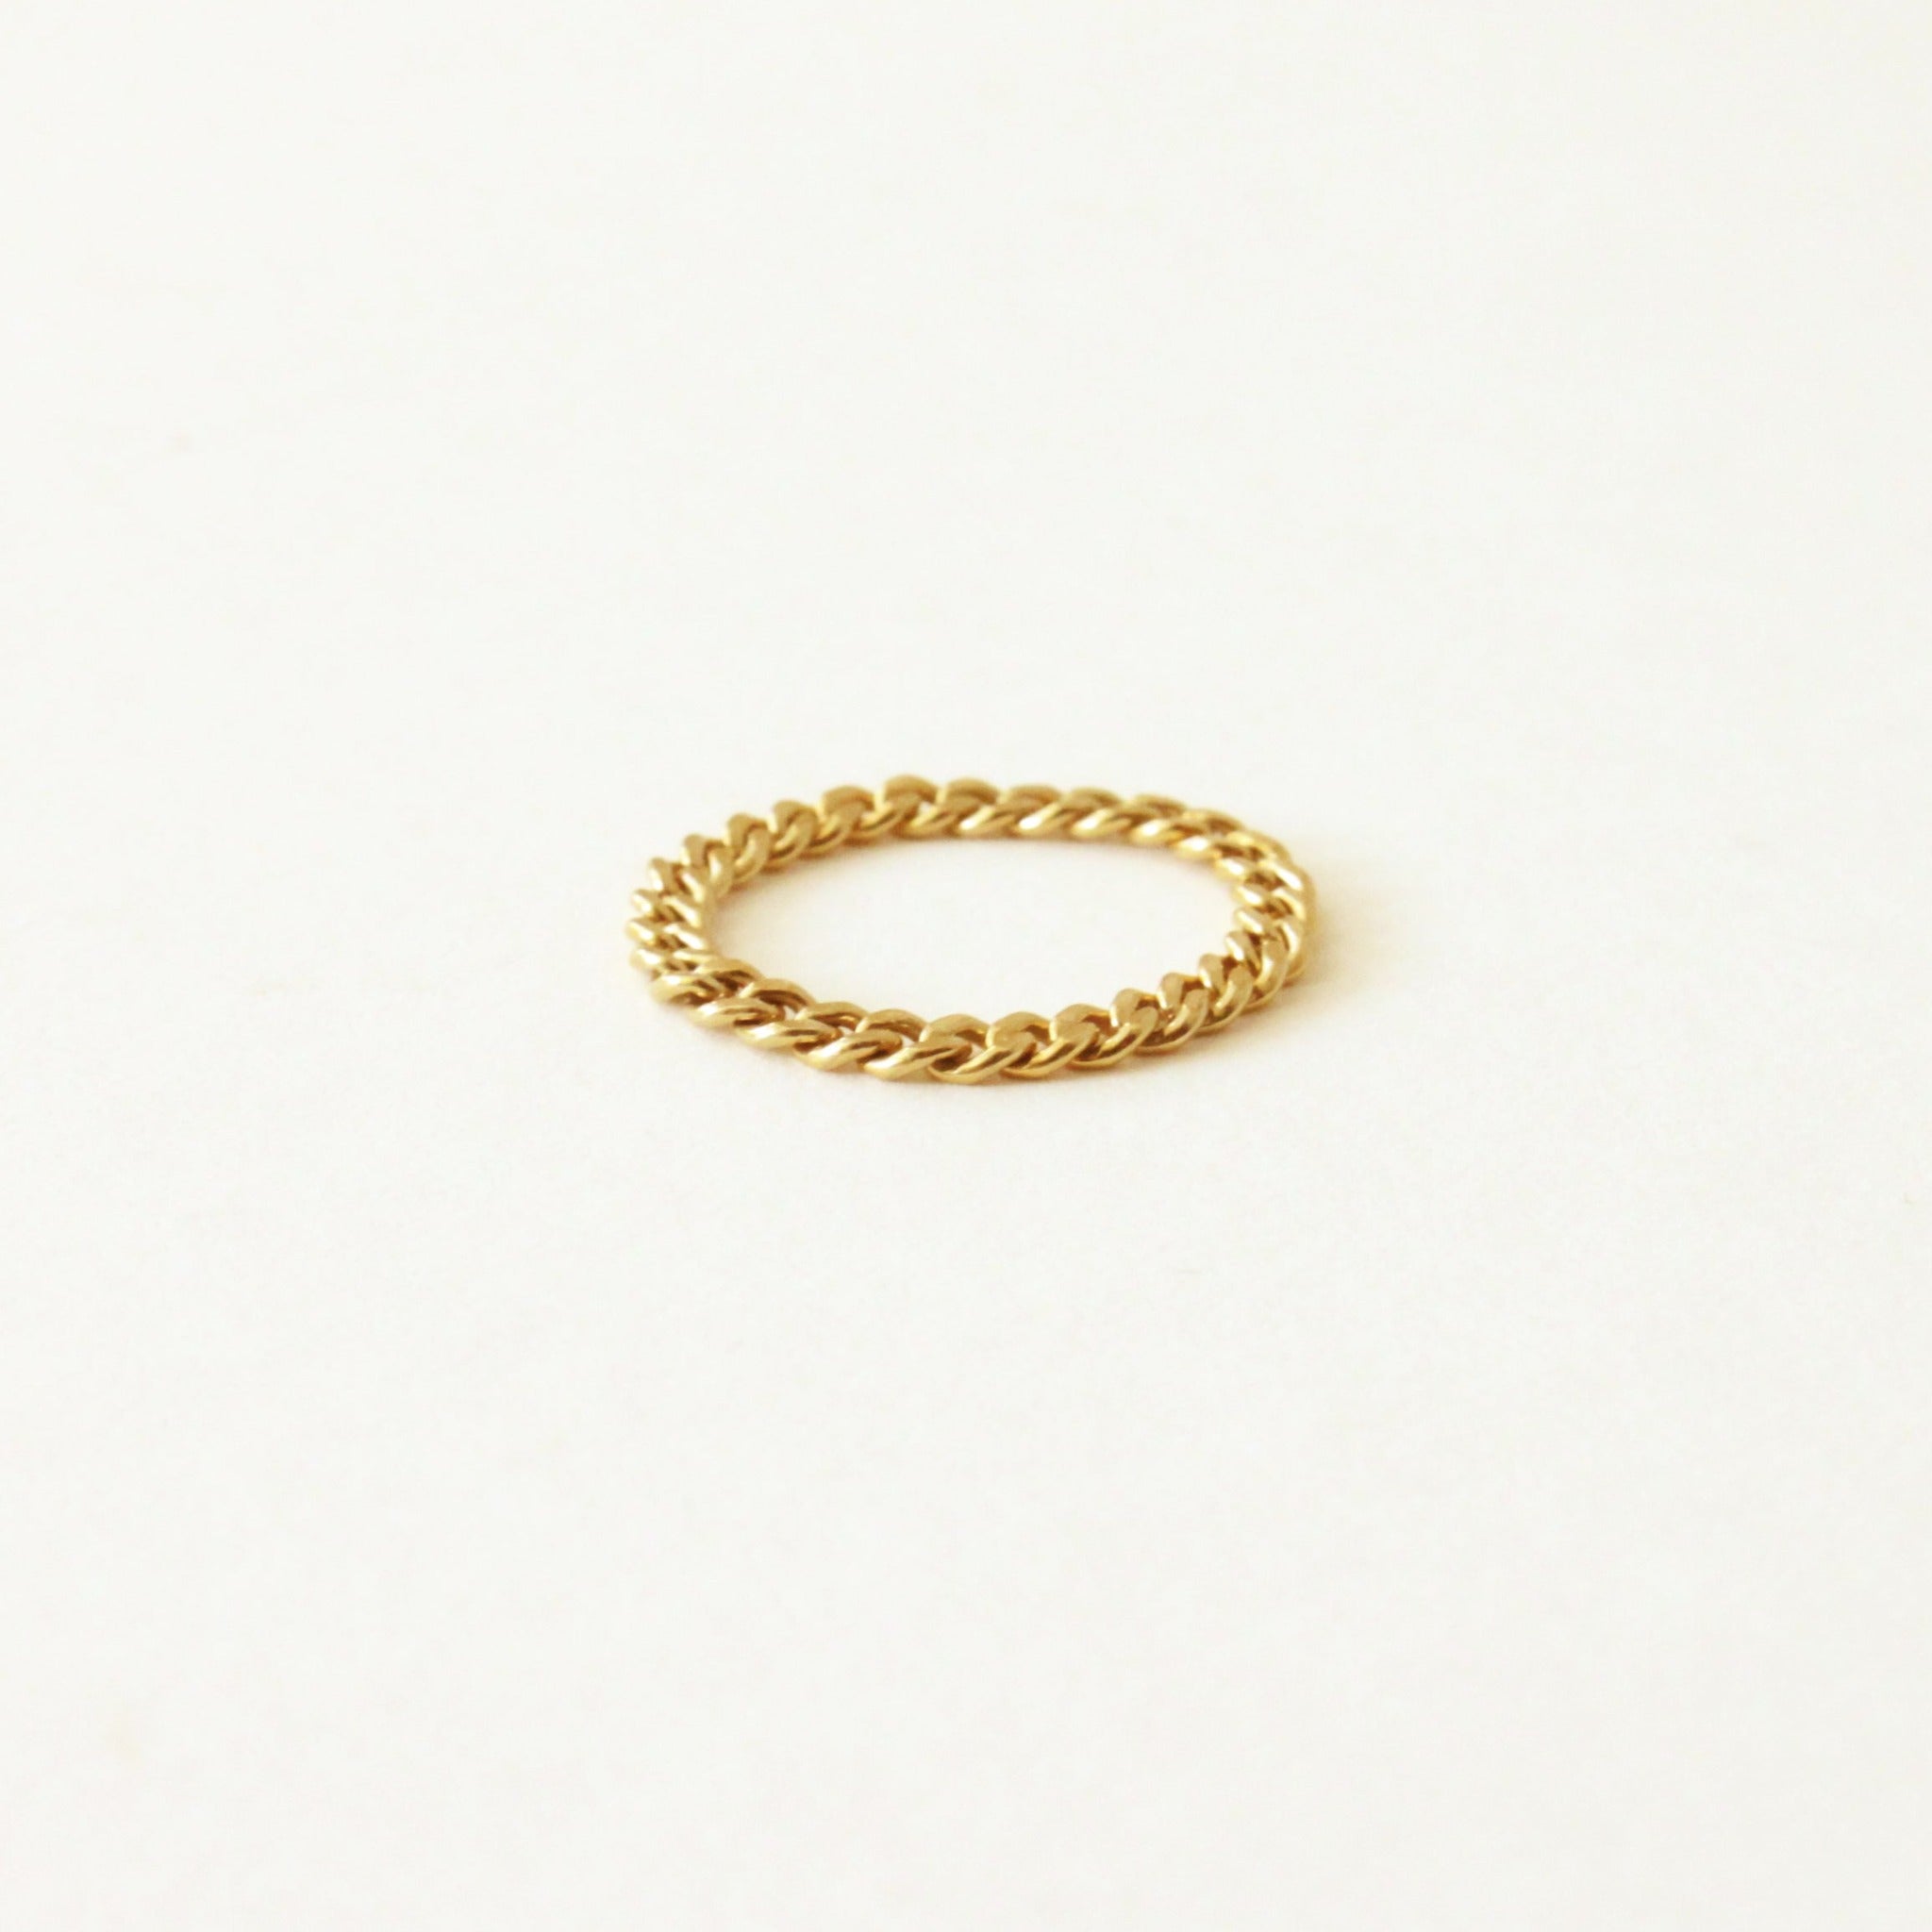 A curb chain ring made with 14k gold filled metal. Simple but strikingly unique ring. It's soft and flexible so it's comfortable to wear.